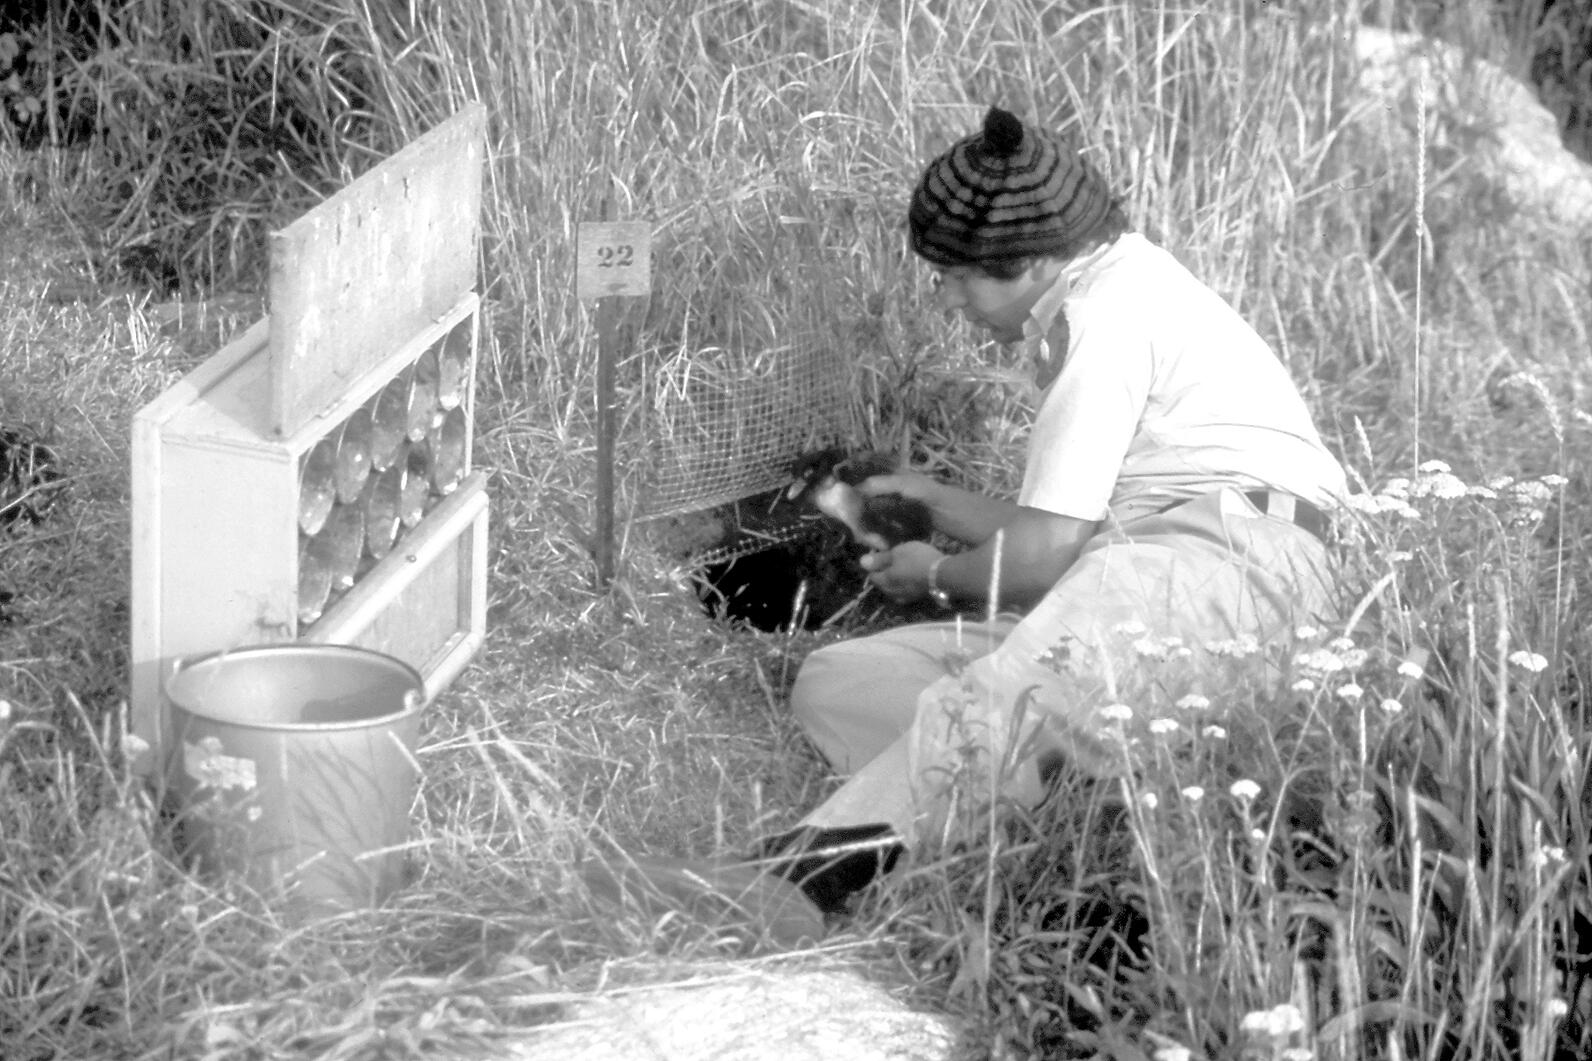 Steve Kress Putting a Young Chick into a Burrow at Eastern Egg Rock circa 1975